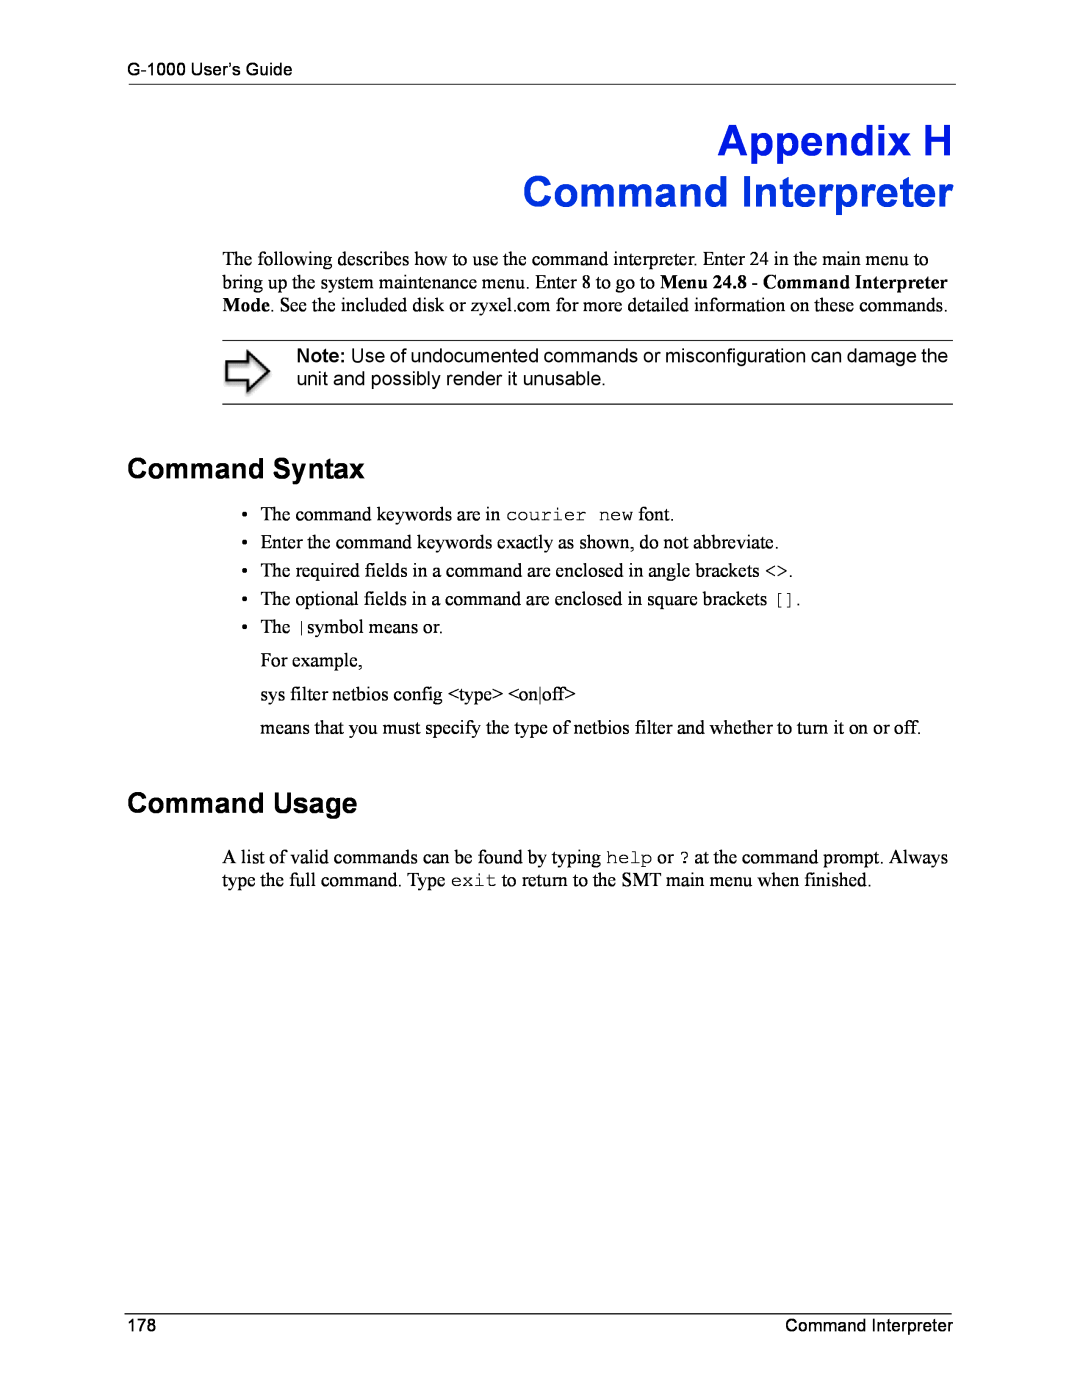 ZyXEL Communications G-1000 manual Appendix H, Command Interpreter, Command Syntax, Command Usage 